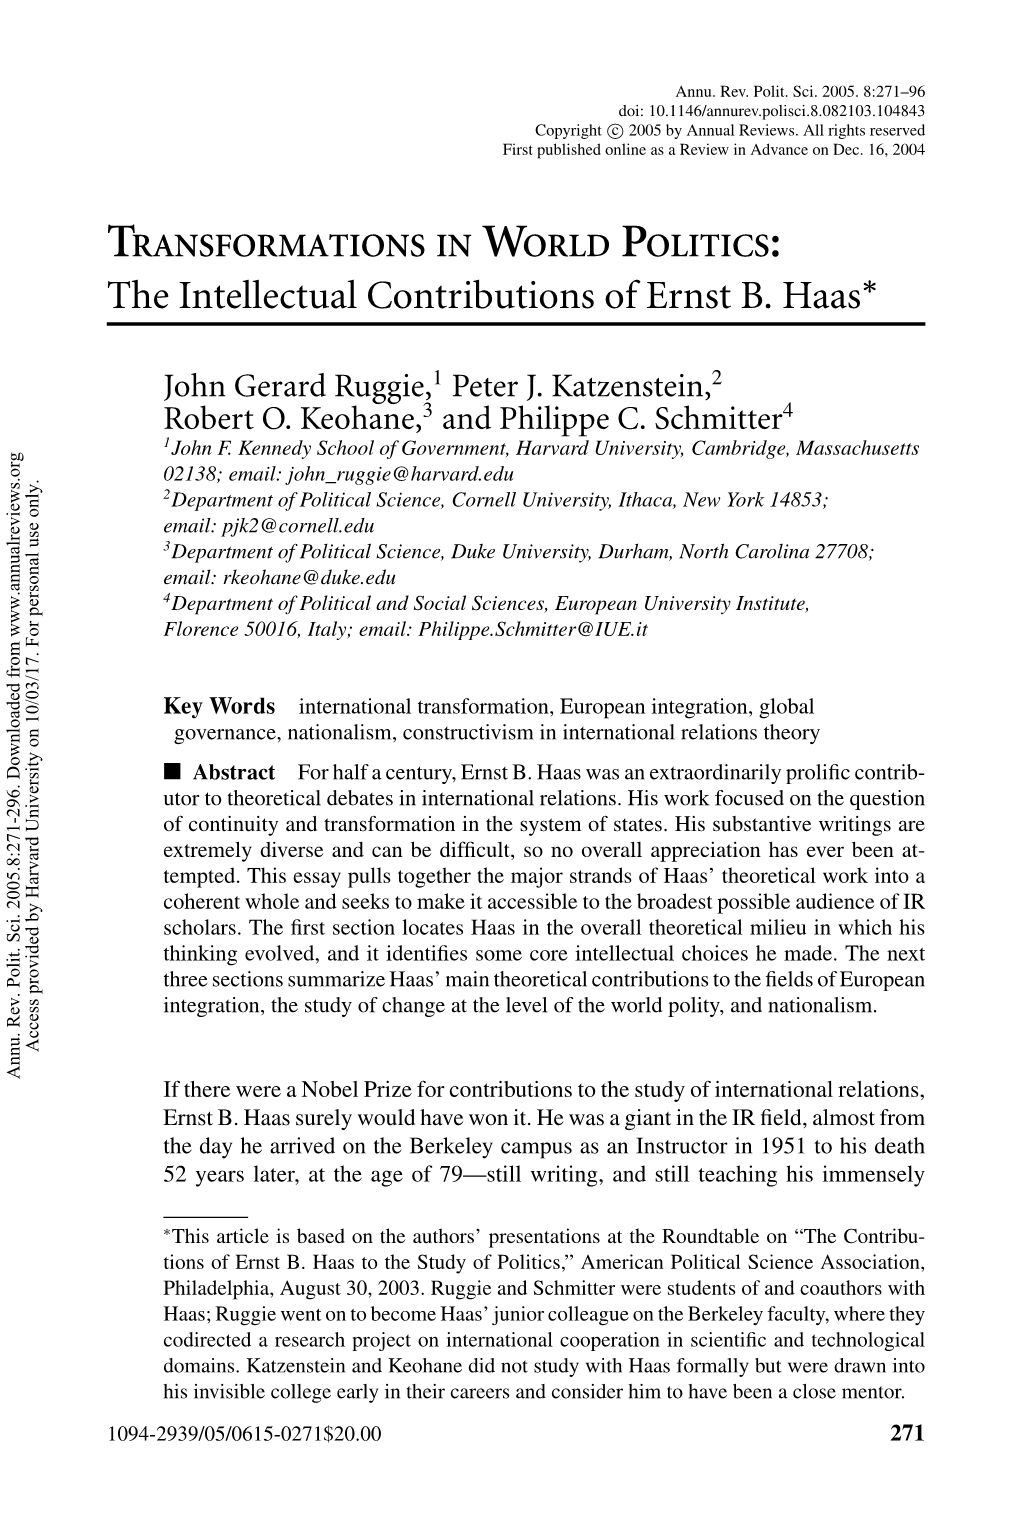 TRANSFORMATIONS in WORLD POLITICS: the Intellectual Contributions of Ernst B